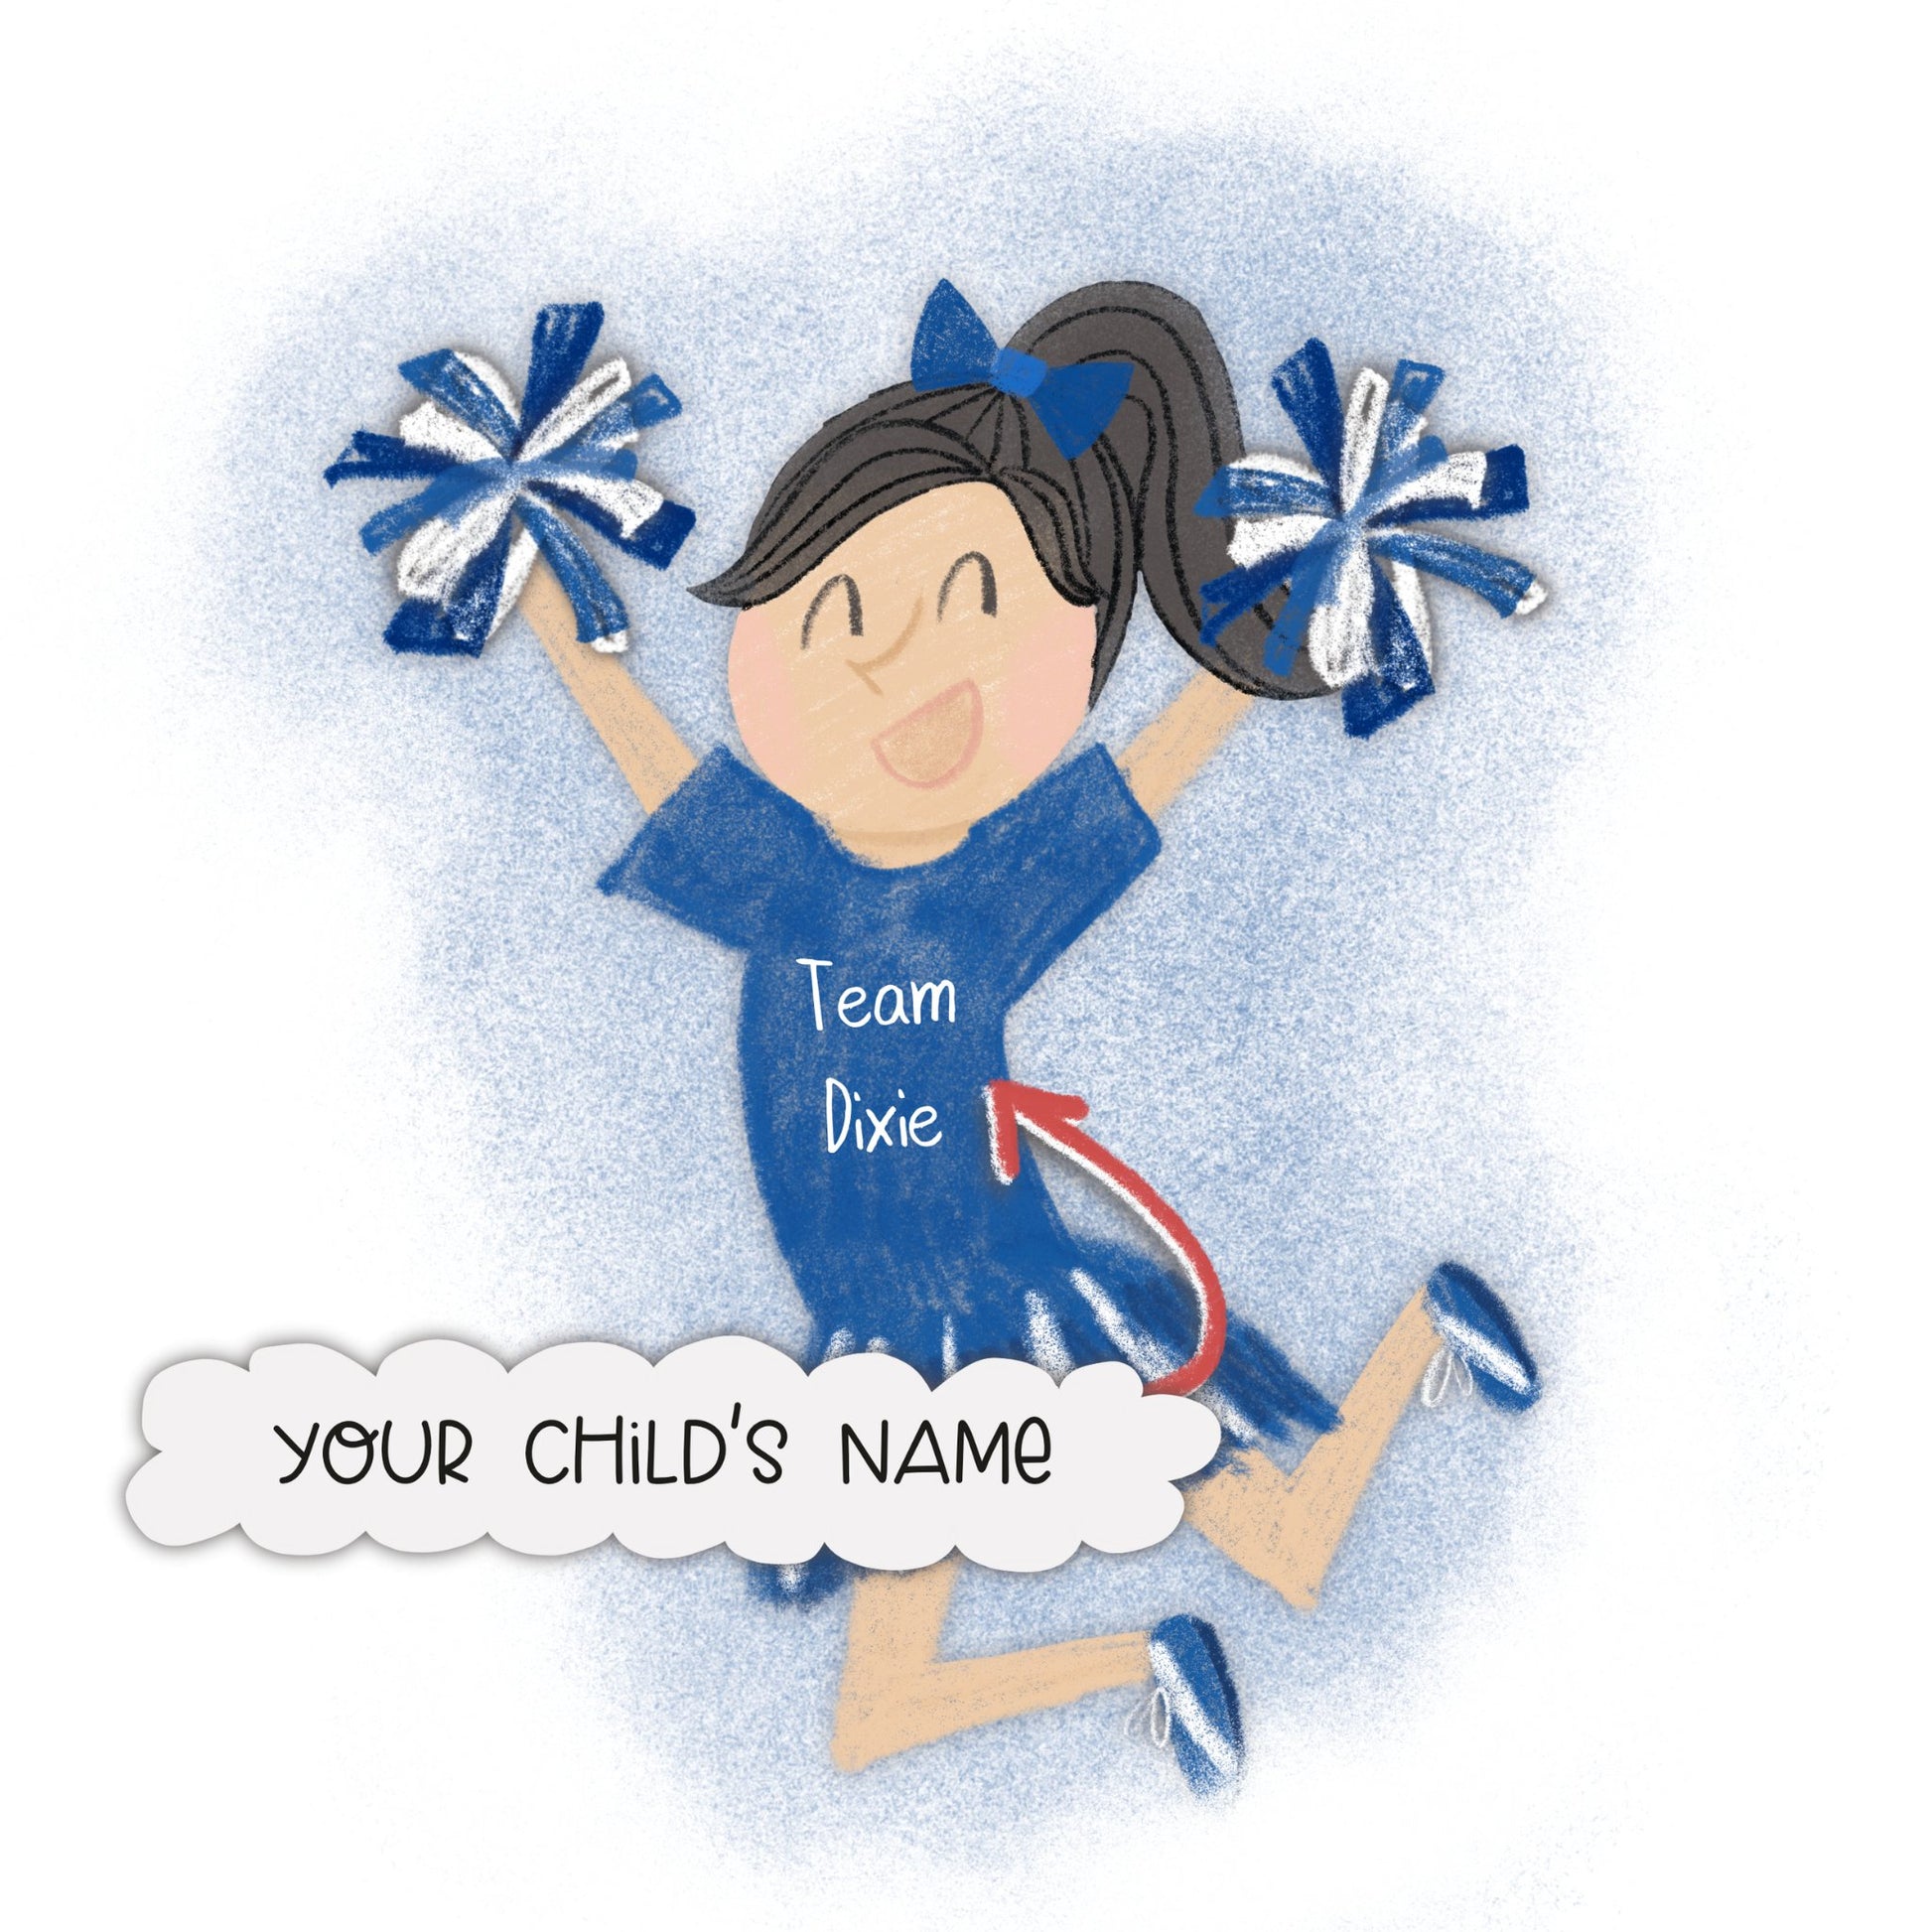 gift certificate example page from the self-published personalized book called “You’re More Than My Teacher” featuring a cheerleader. The child’s name will be inserted on the cheerleader’s uniform